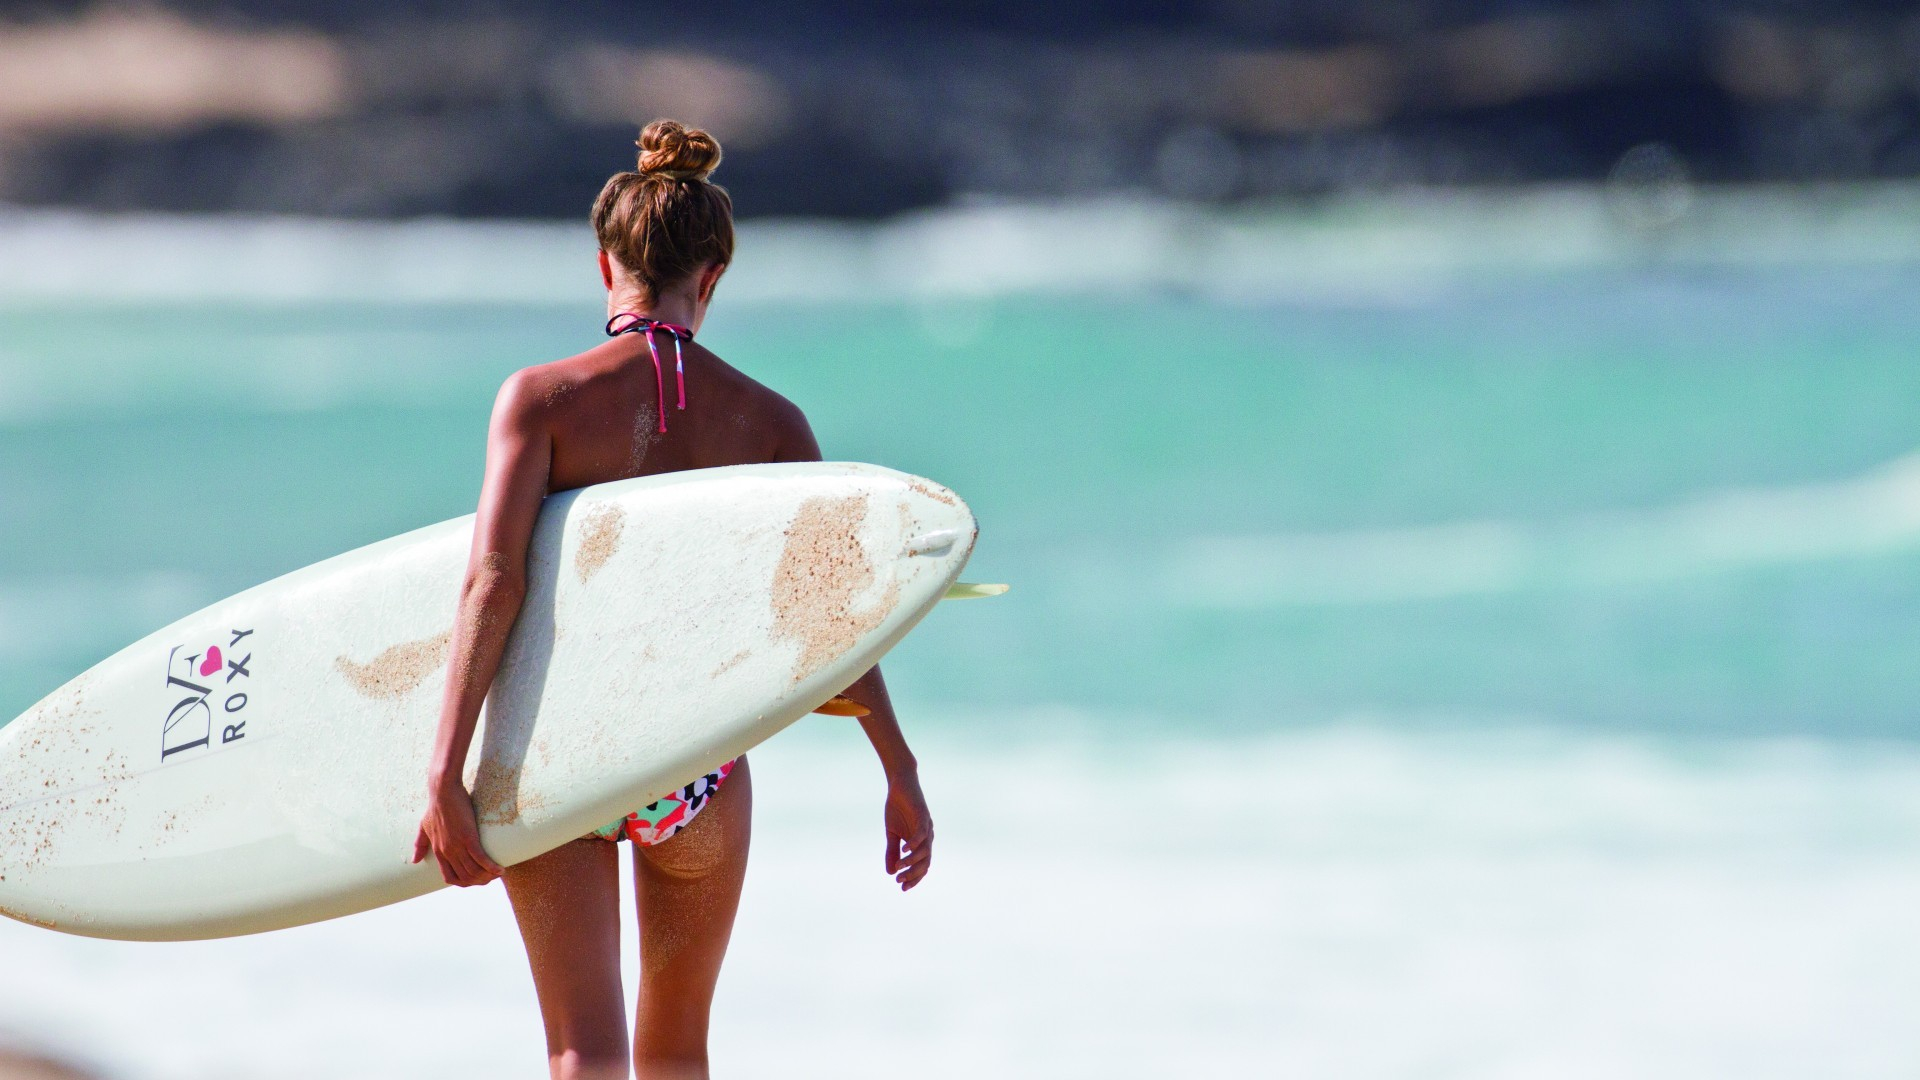 1920x1080 Wallpaper : women, model, sea, beach, surfboards, bikini, paddle, wave, surfboard, px, sports equipment, extreme sport, surfing equipment and supplies, boardsport, water sport, surface water sports, Hair Bun wallup